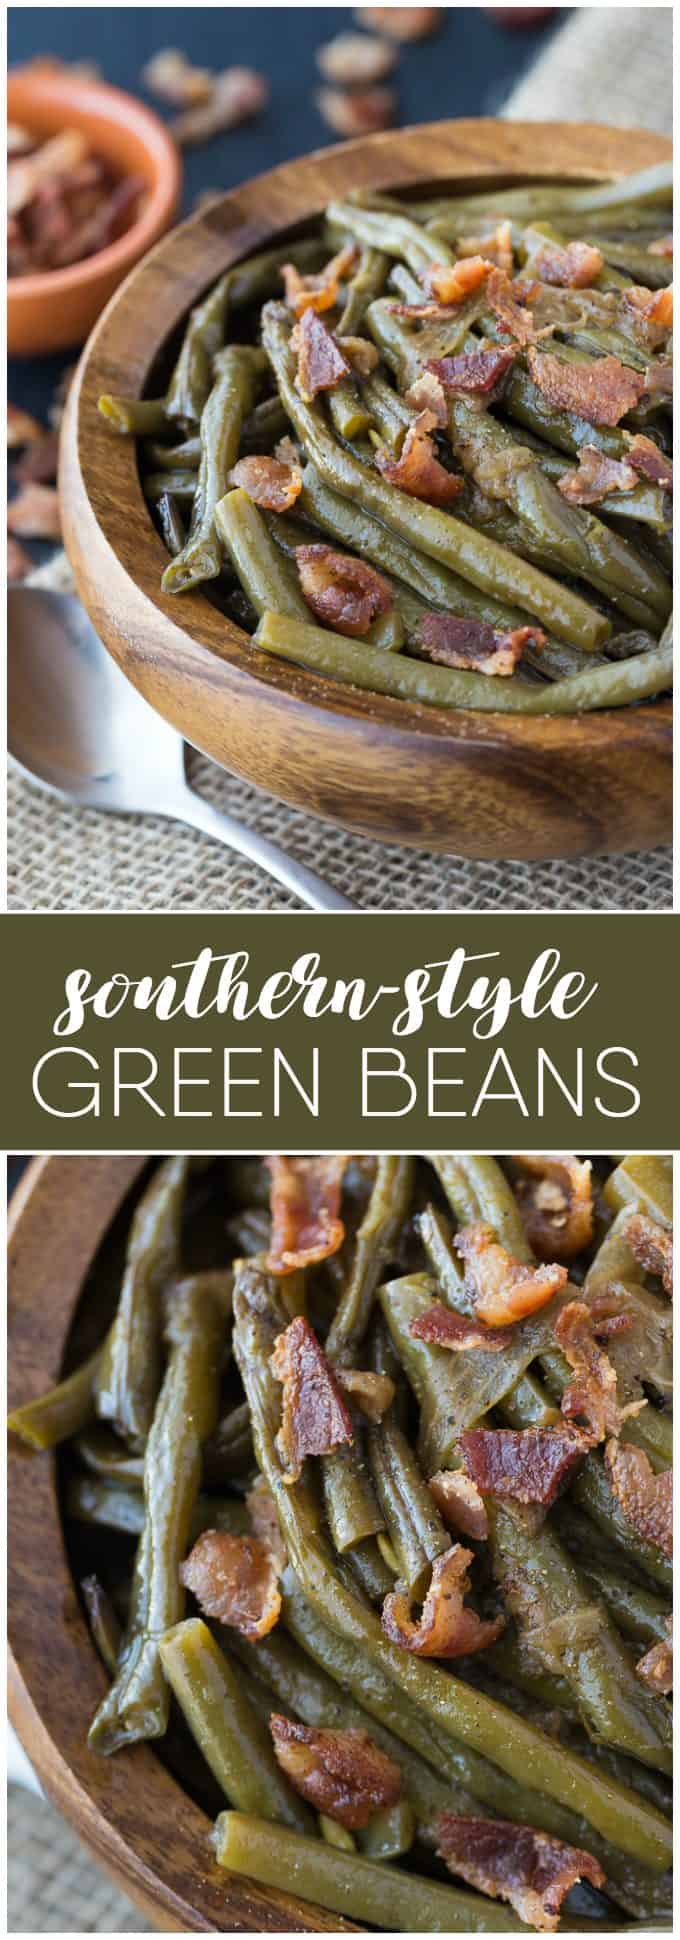 Southern Style Green Beans - The easiest 5-ingredient side dish! Salty bacon is the perfect companion for crisp green beans with a little onion and chicken broth. Yum!